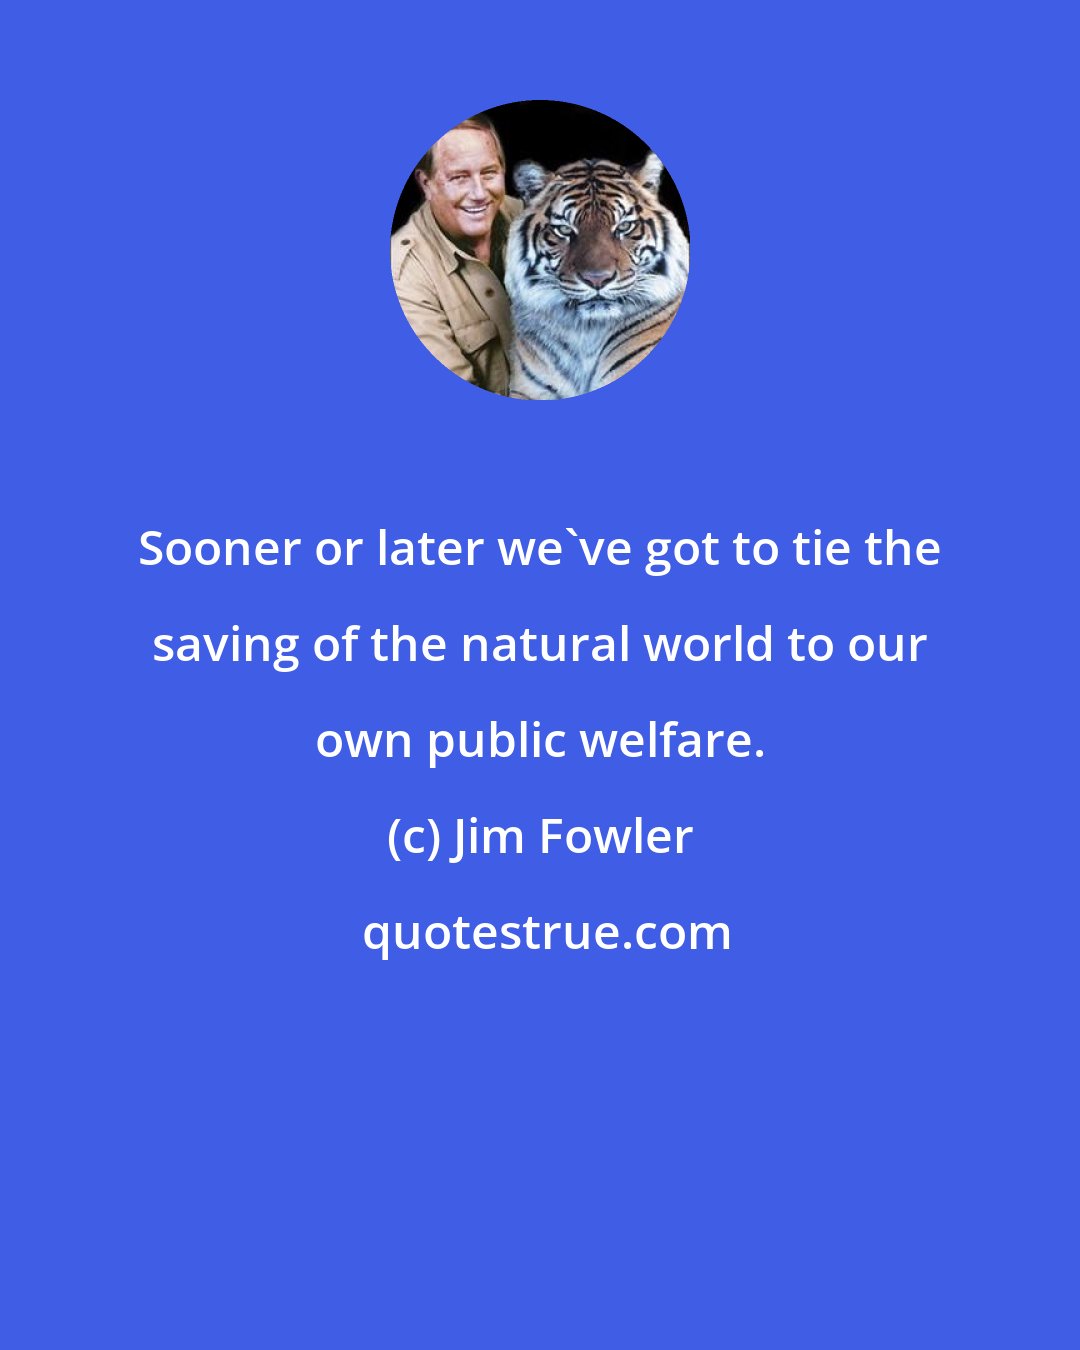 Jim Fowler: Sooner or later we've got to tie the saving of the natural world to our own public welfare.